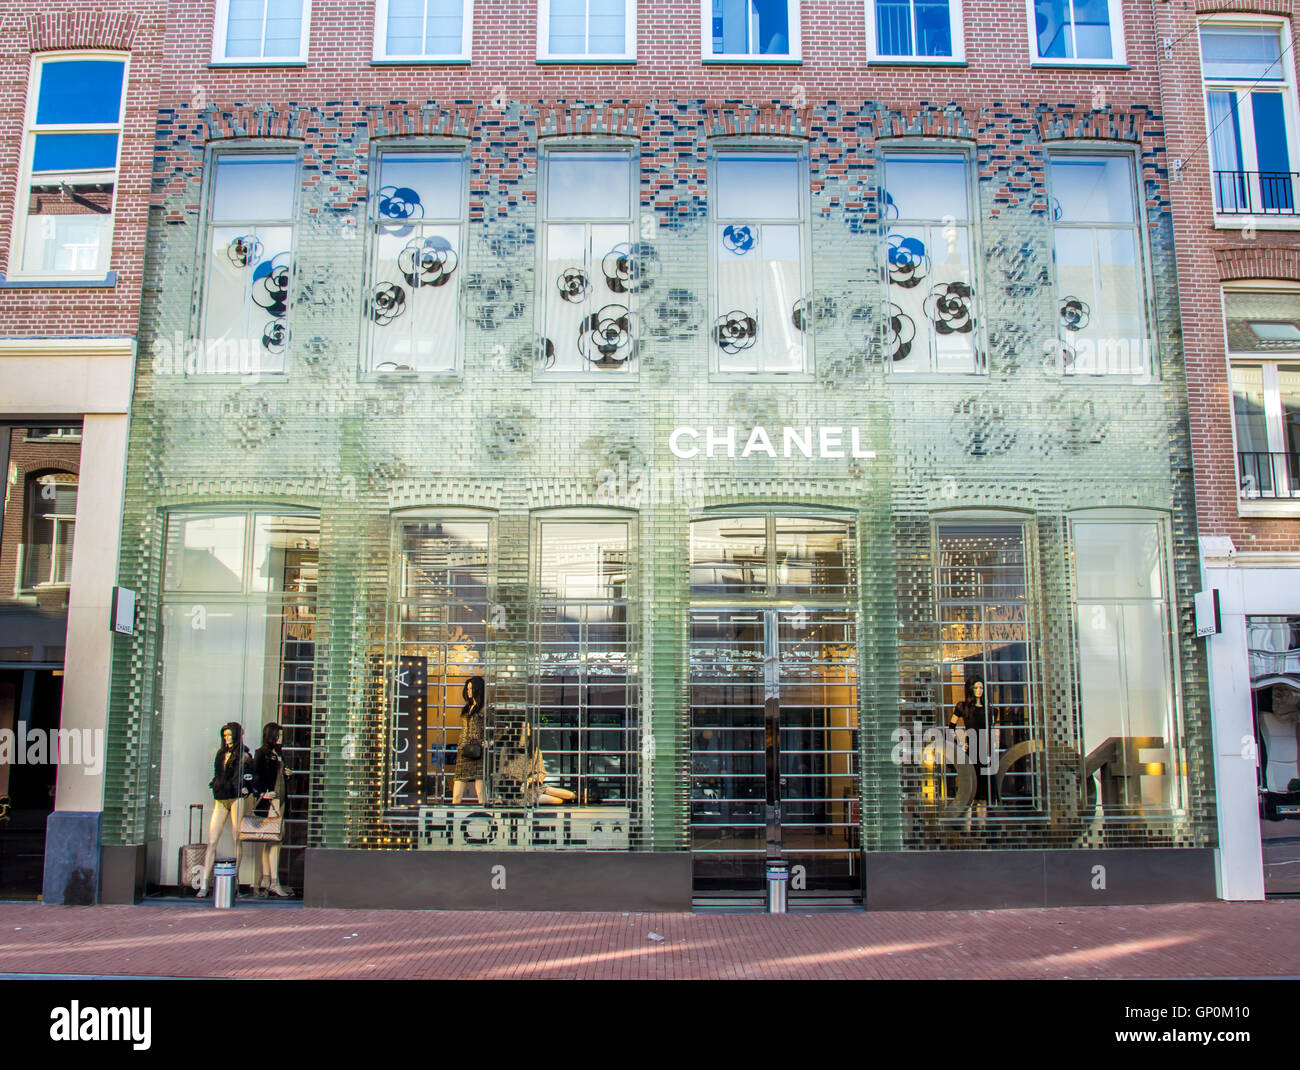 Amsterdam , the Netherlands - April 13, 2016: chanel store in P.C.  Hooftstraat Amsterdam Stock Photo - Alamy